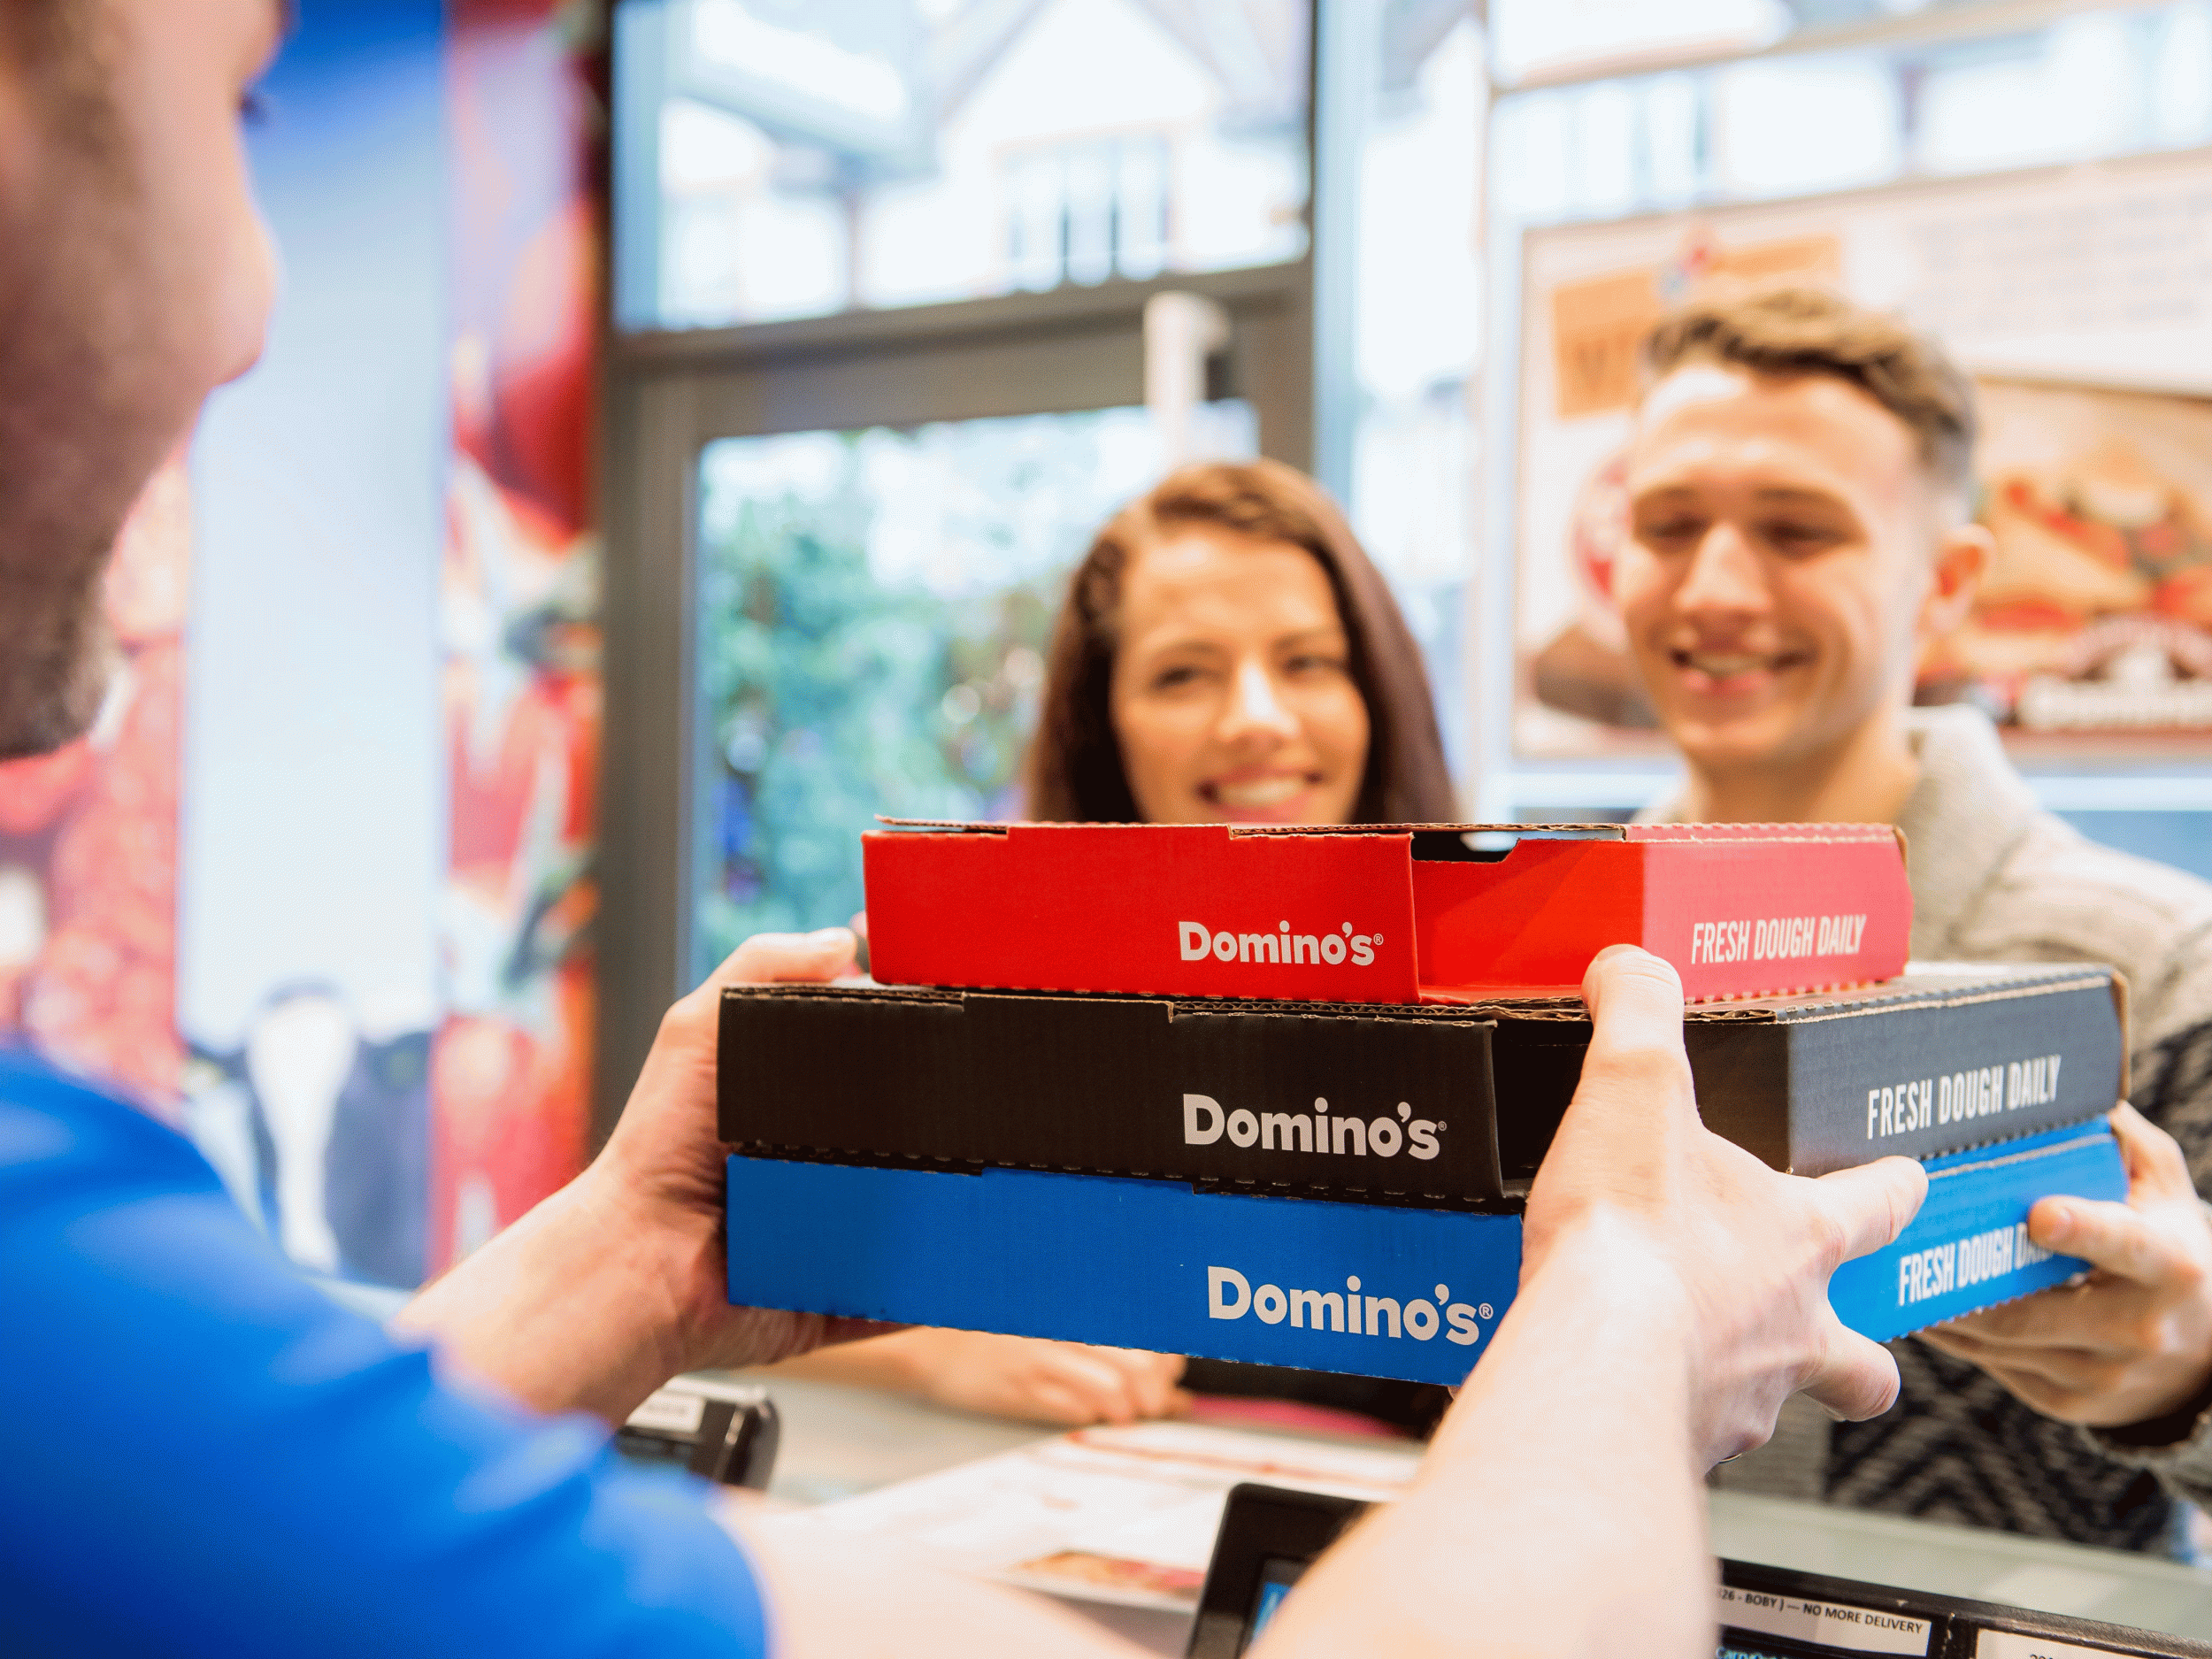 The special offer is to celebrate the official opening of Domino’s 1,000th UK store today in Overton, Hampshire